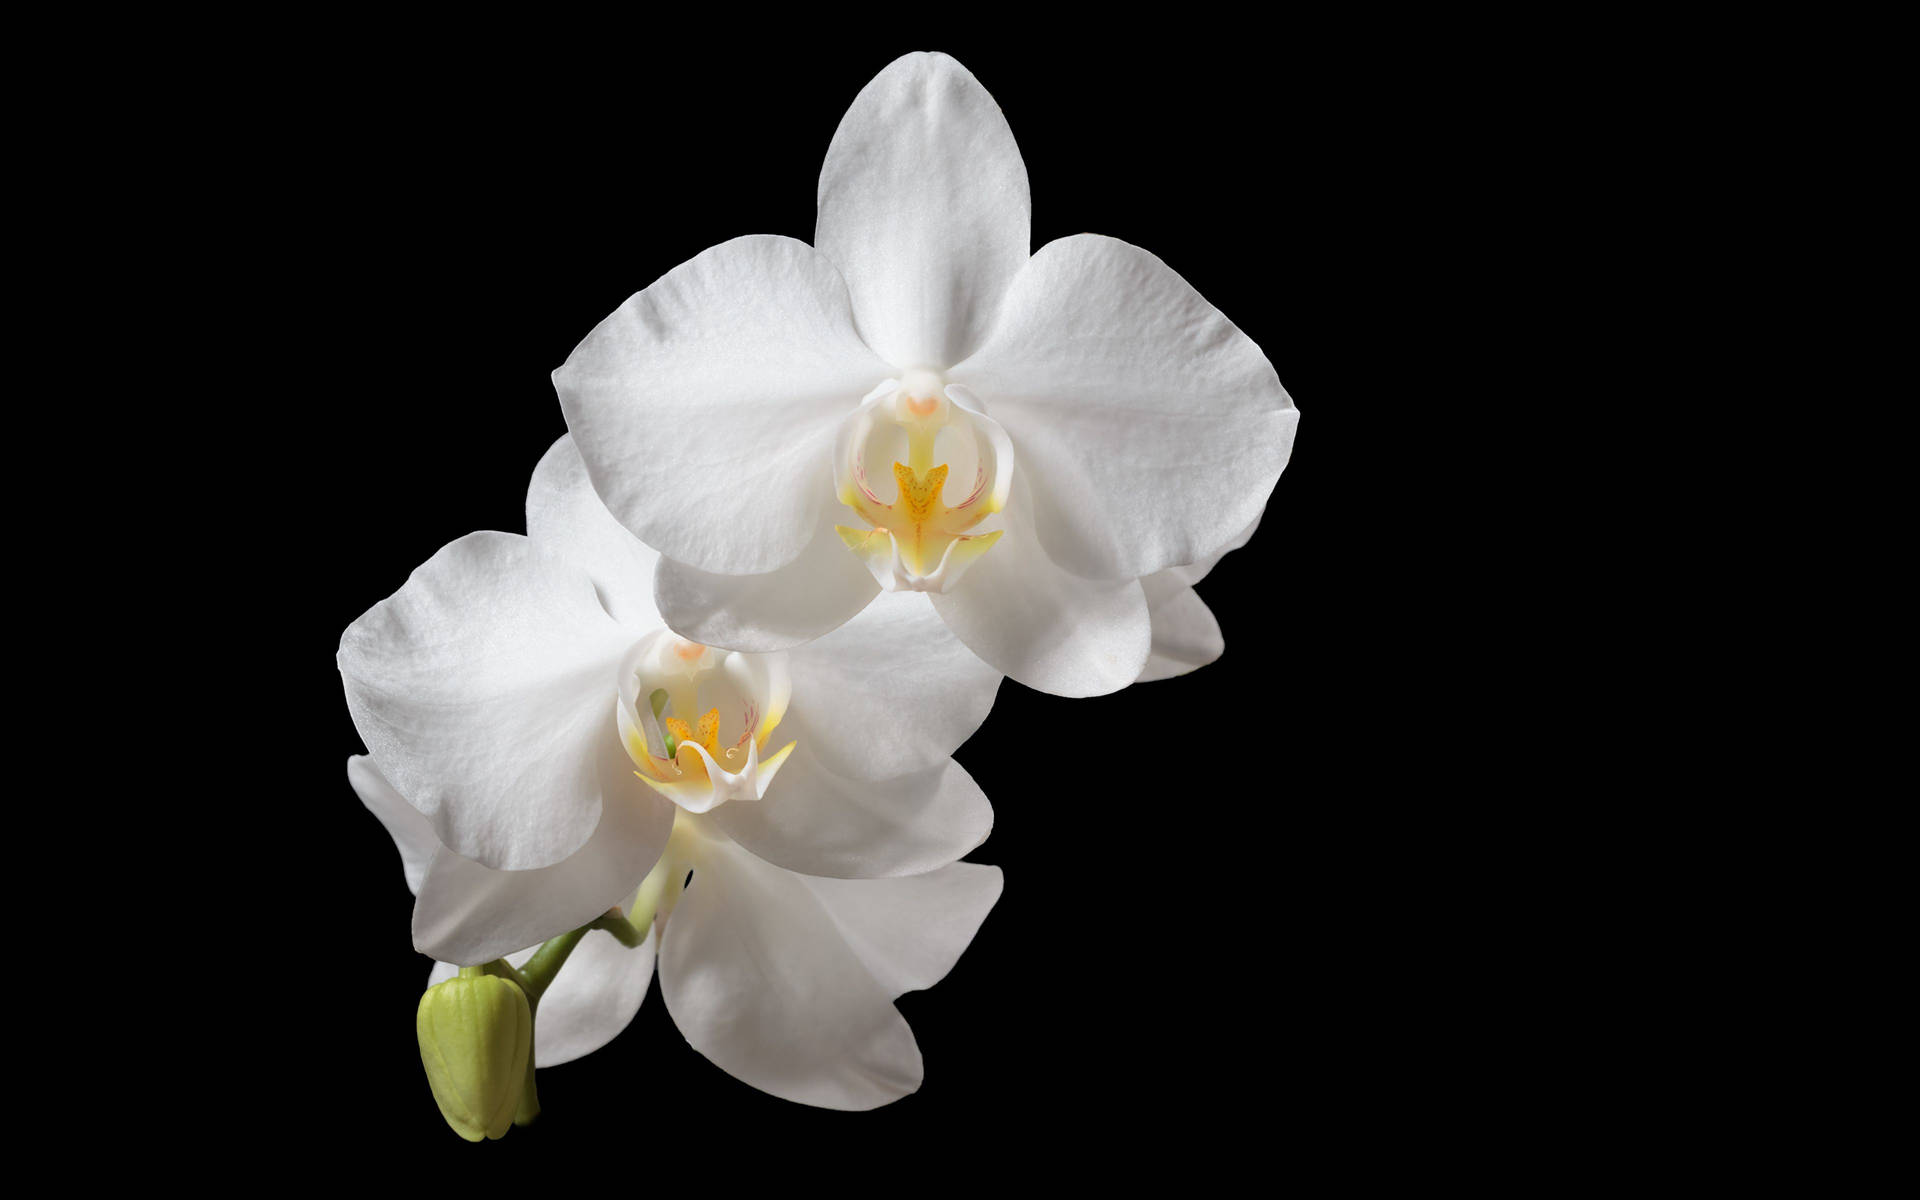 Pure White Orchid Flower Wallpaper